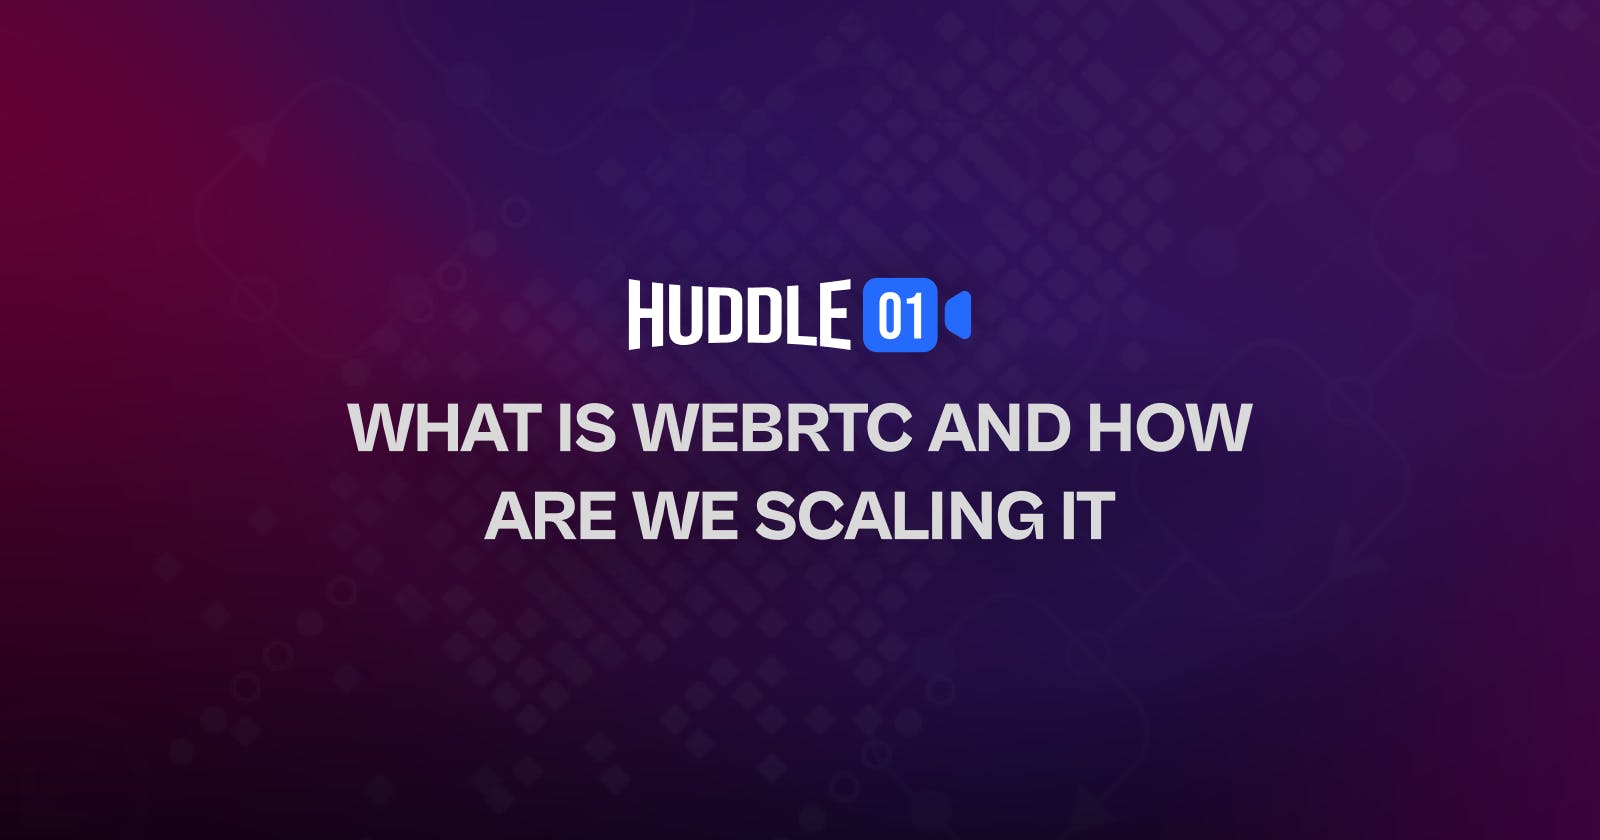 What is WebRTC and how are we scaling it?